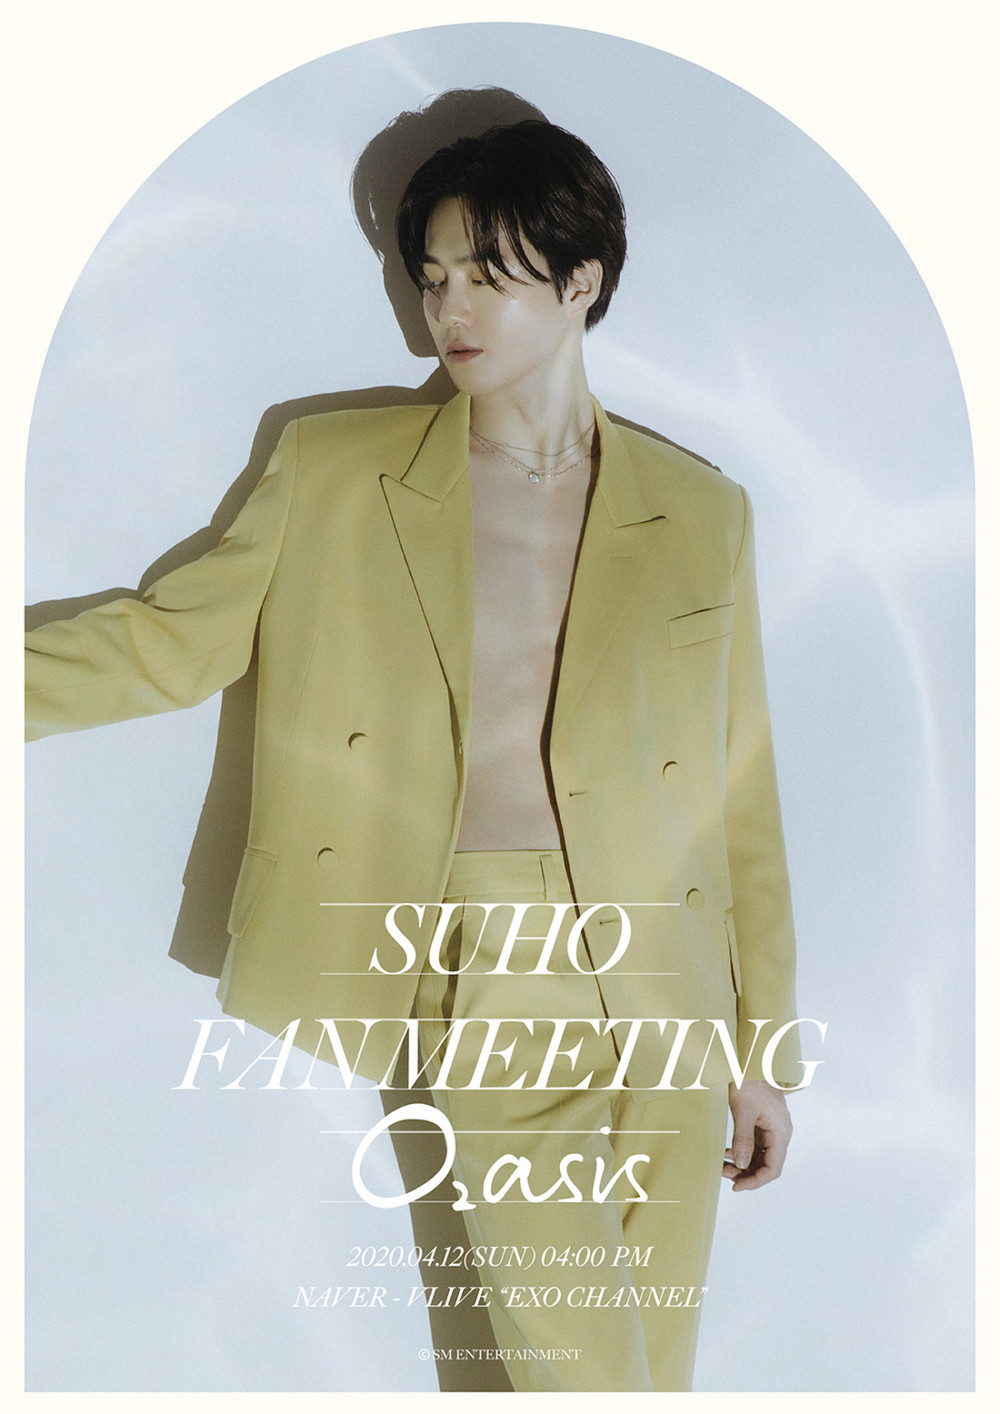 EXO's Suho reveals intimate posters for his online solo fan 